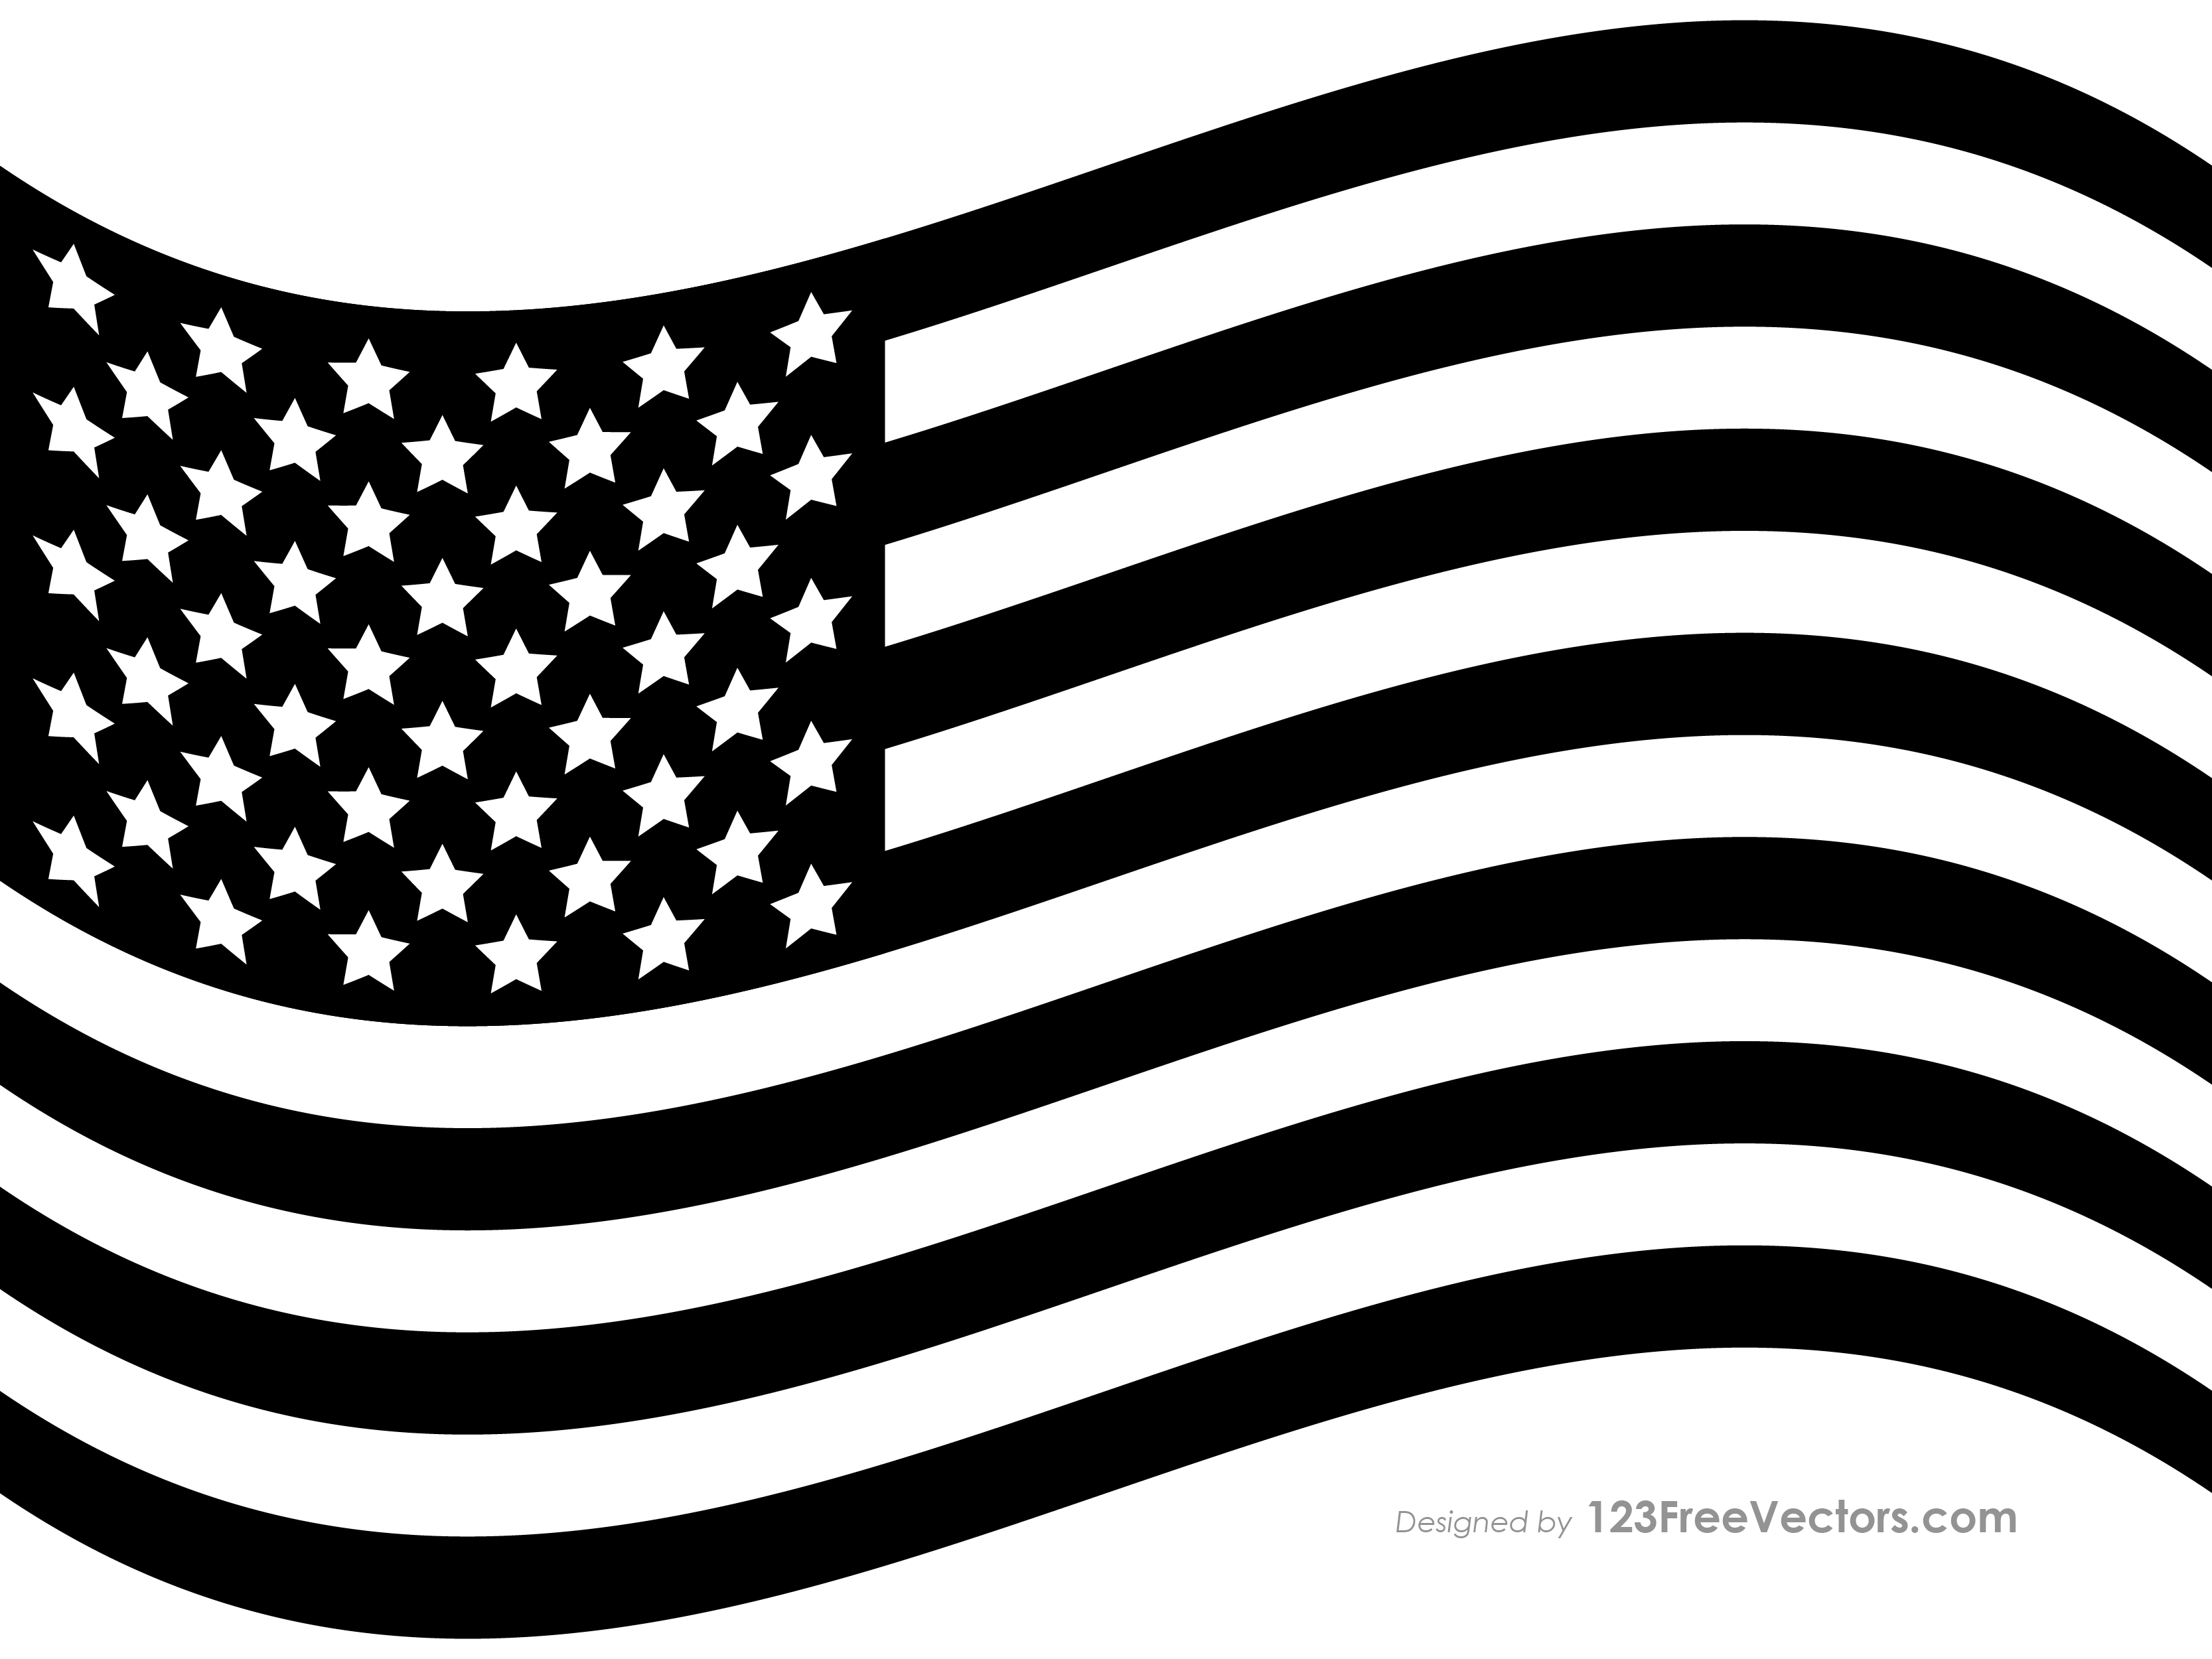 american-flag-clipart-wavy-pictures-on-cliparts-pub-2020